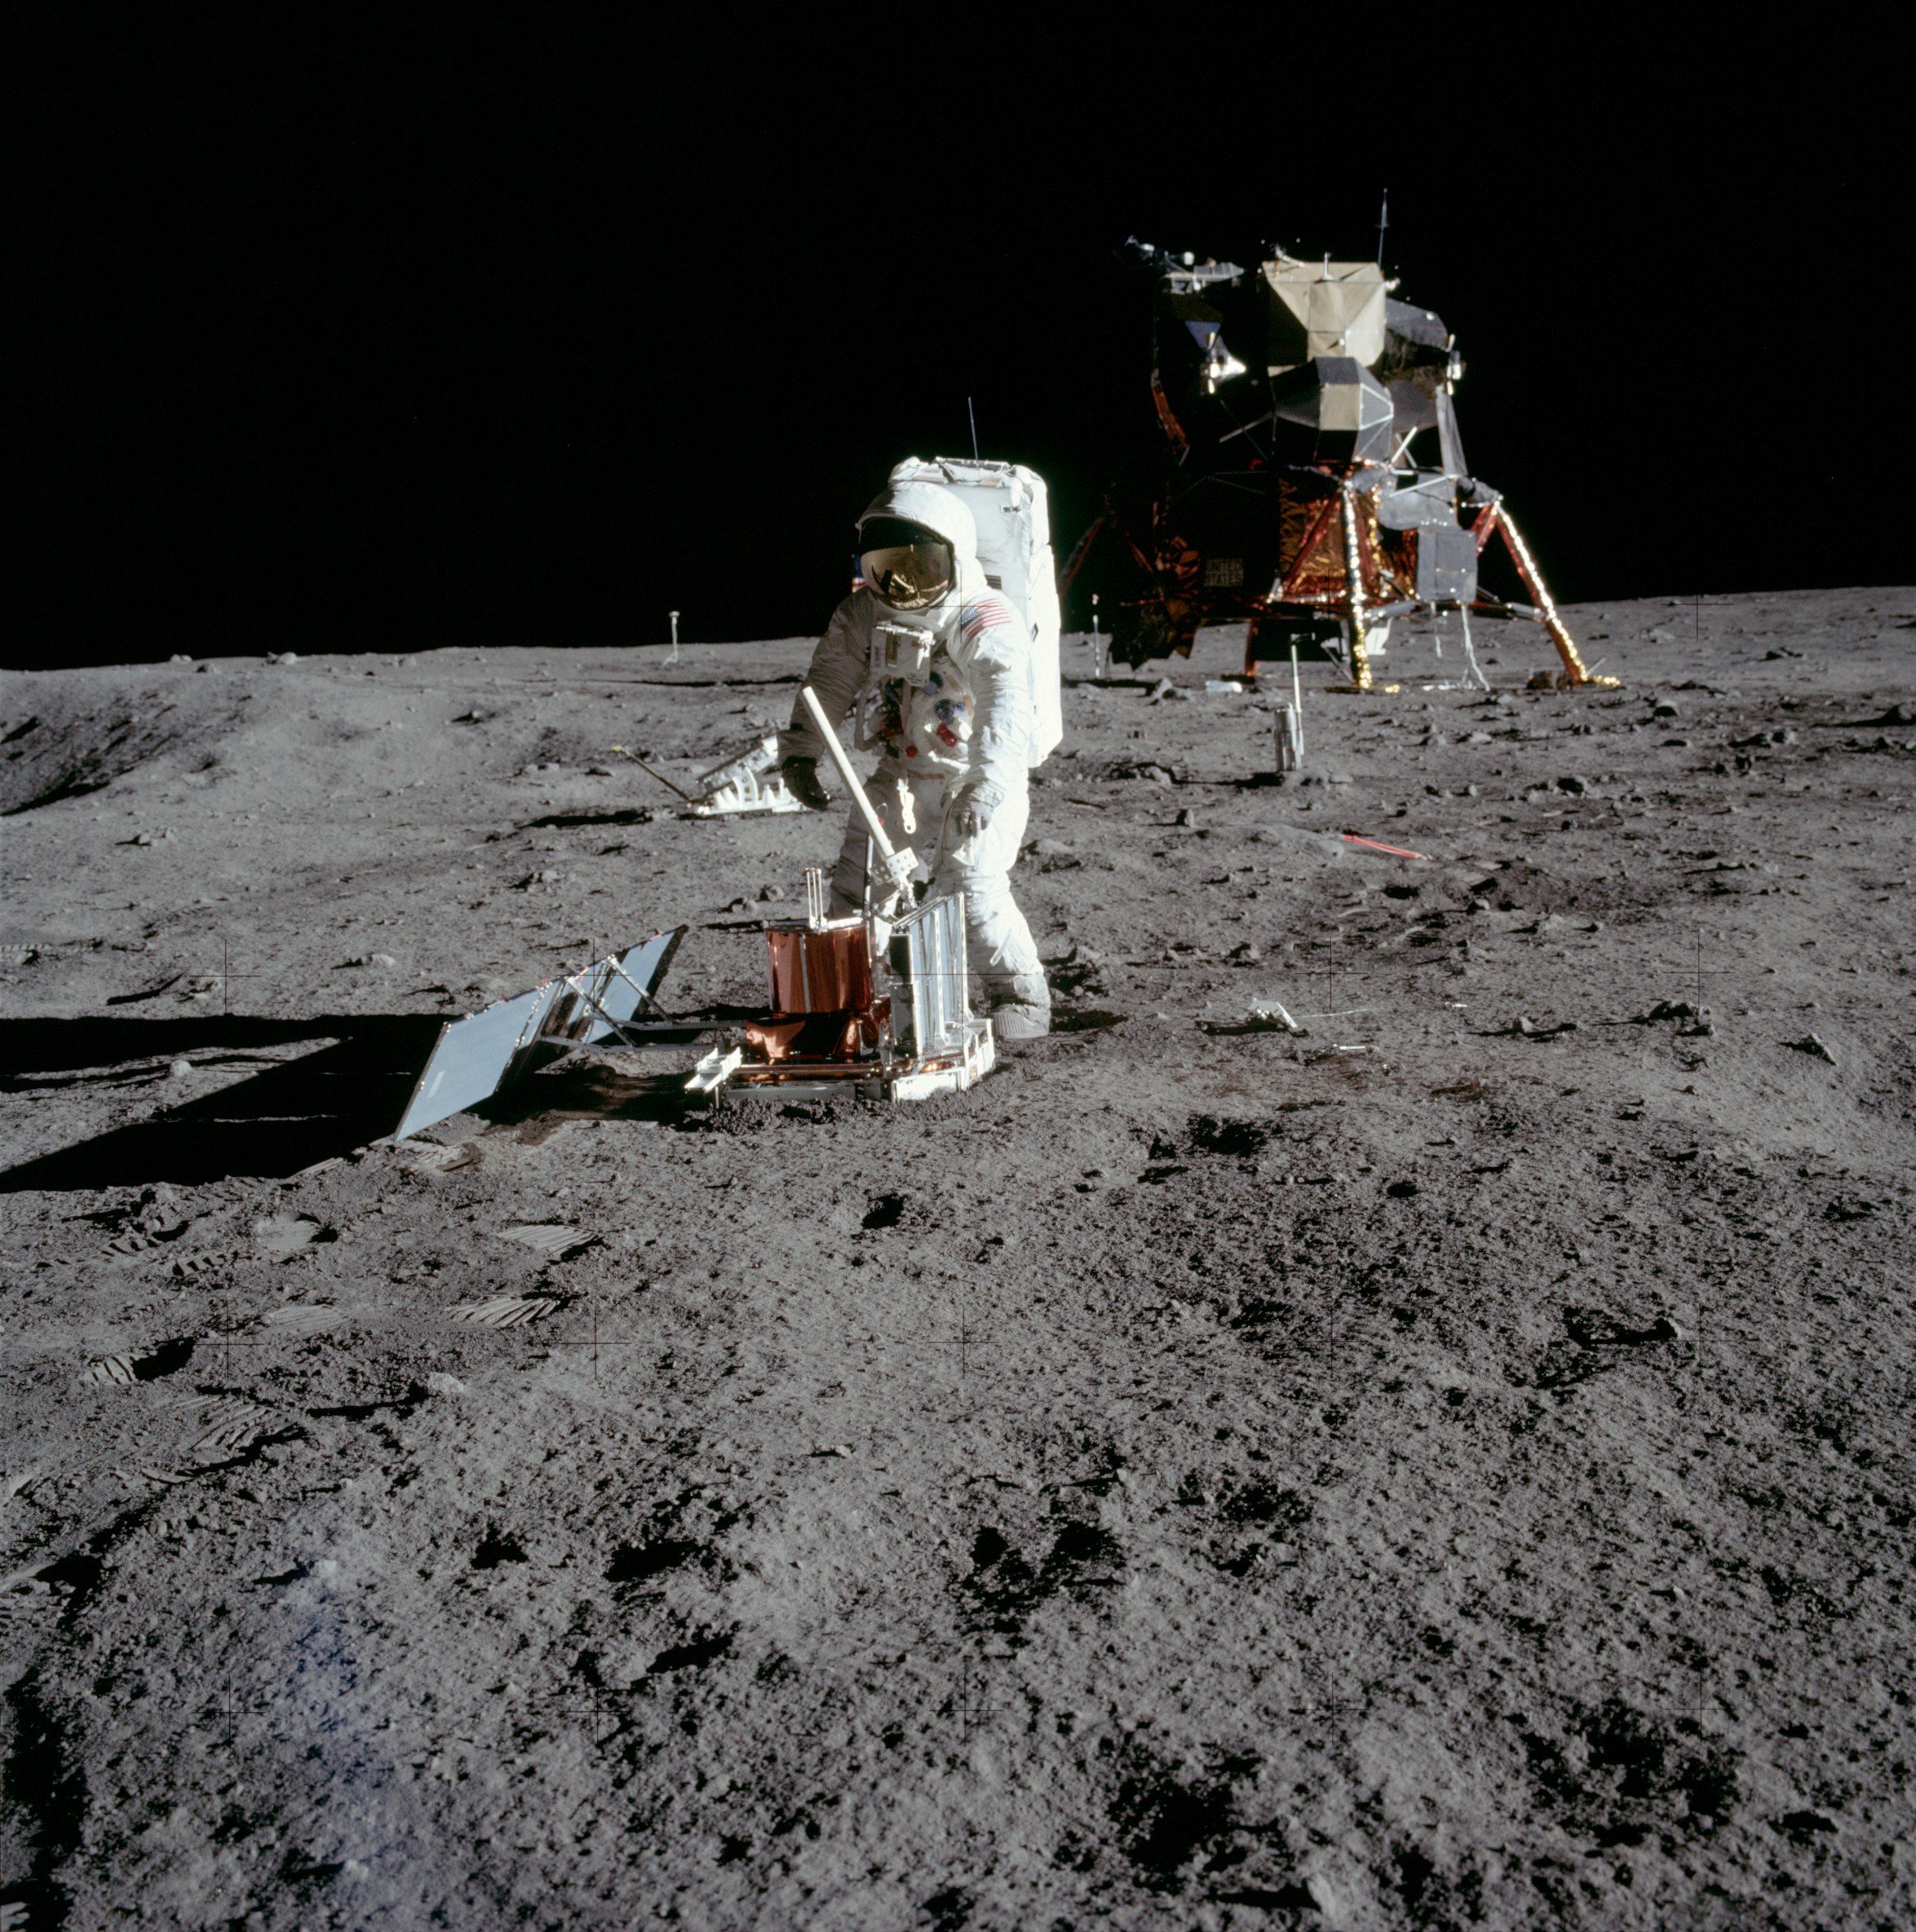 Astronaut Buzz Aldrin installs a seismograph on the Moon surface on July 21, 1969.